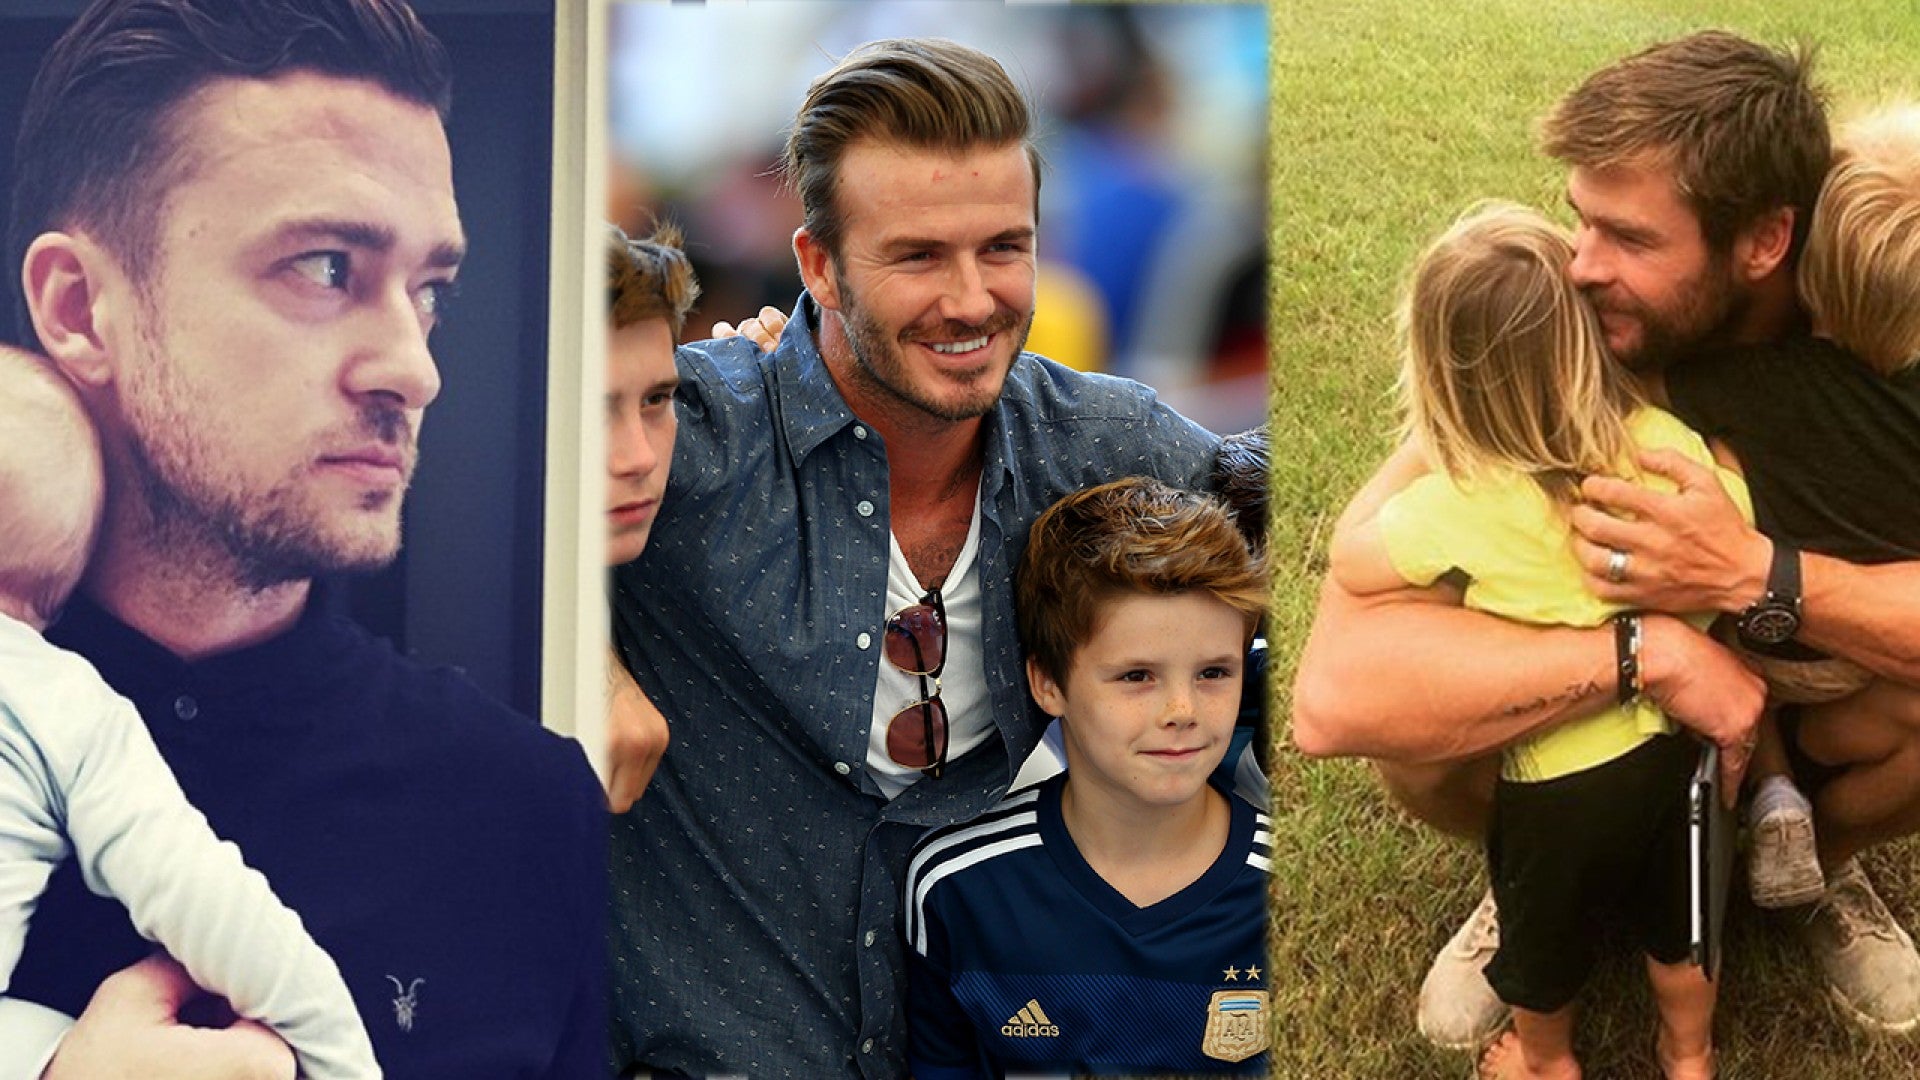 Justin Timberlake, David Beckham and Other Famous Fathers We're Thankful For